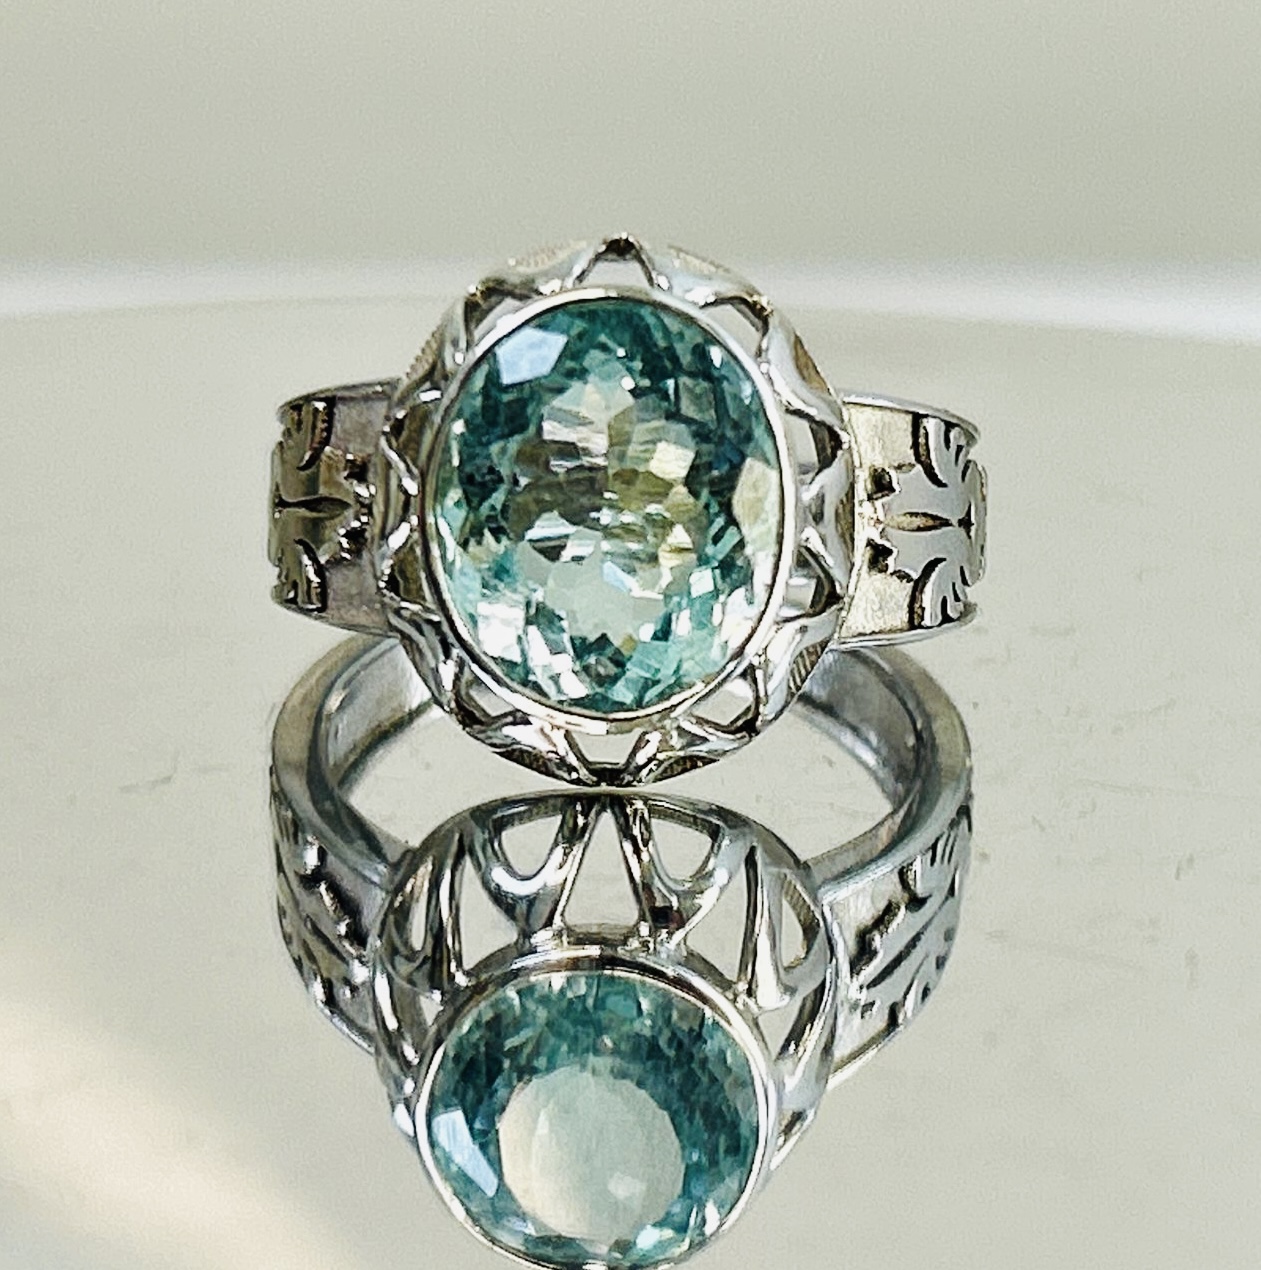 Beautiful Natural Flawless 4.58 CT Aquamarine Ring With Diamonds and 18k Gold